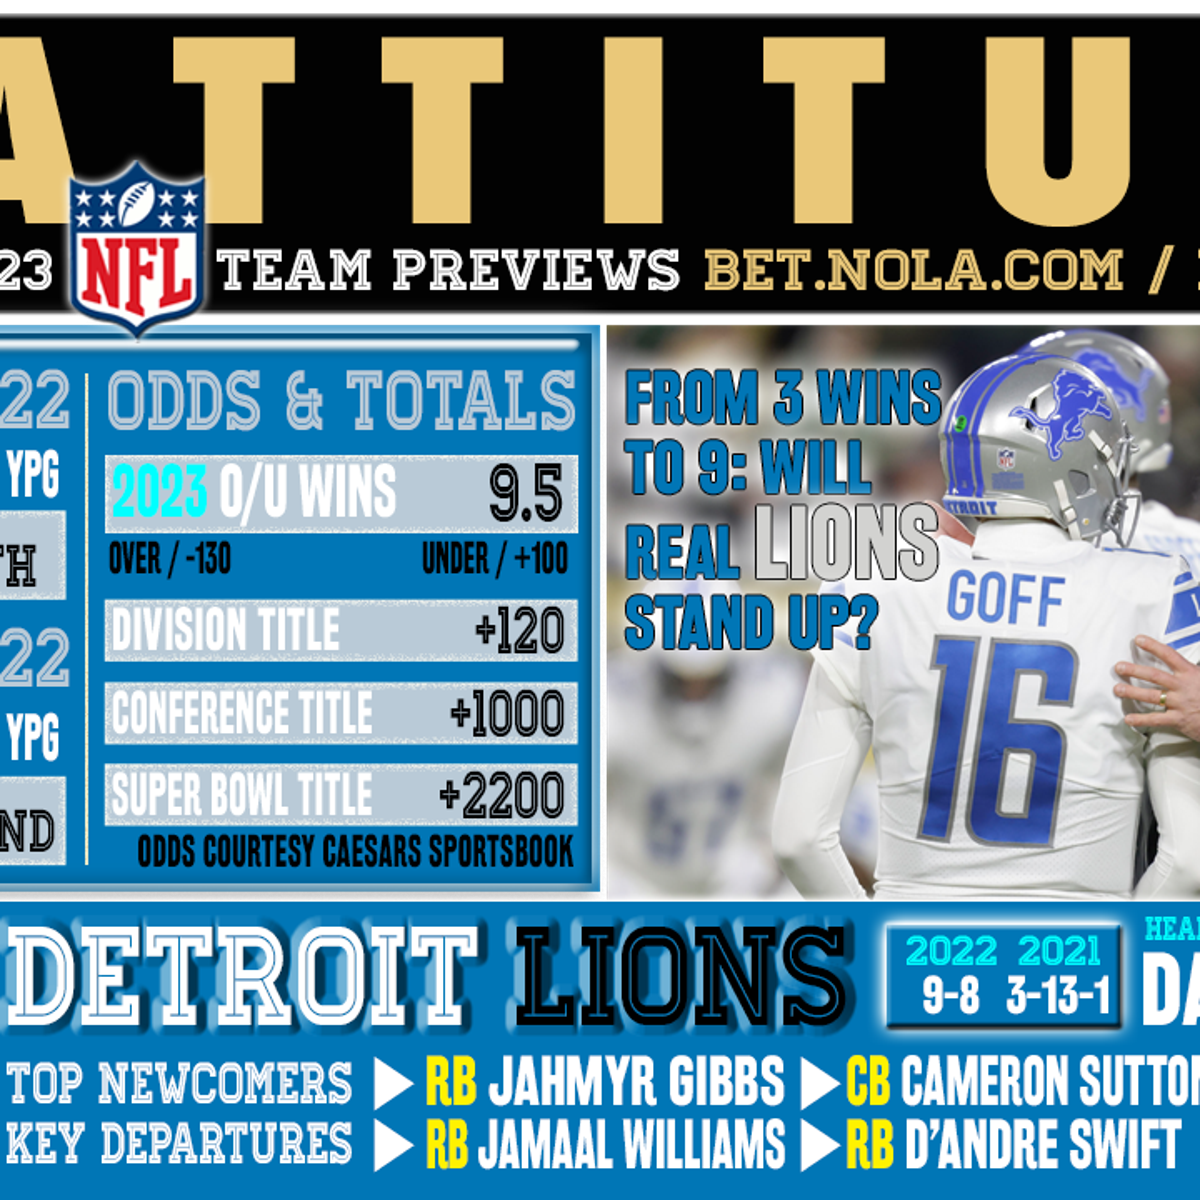 the lions schedule